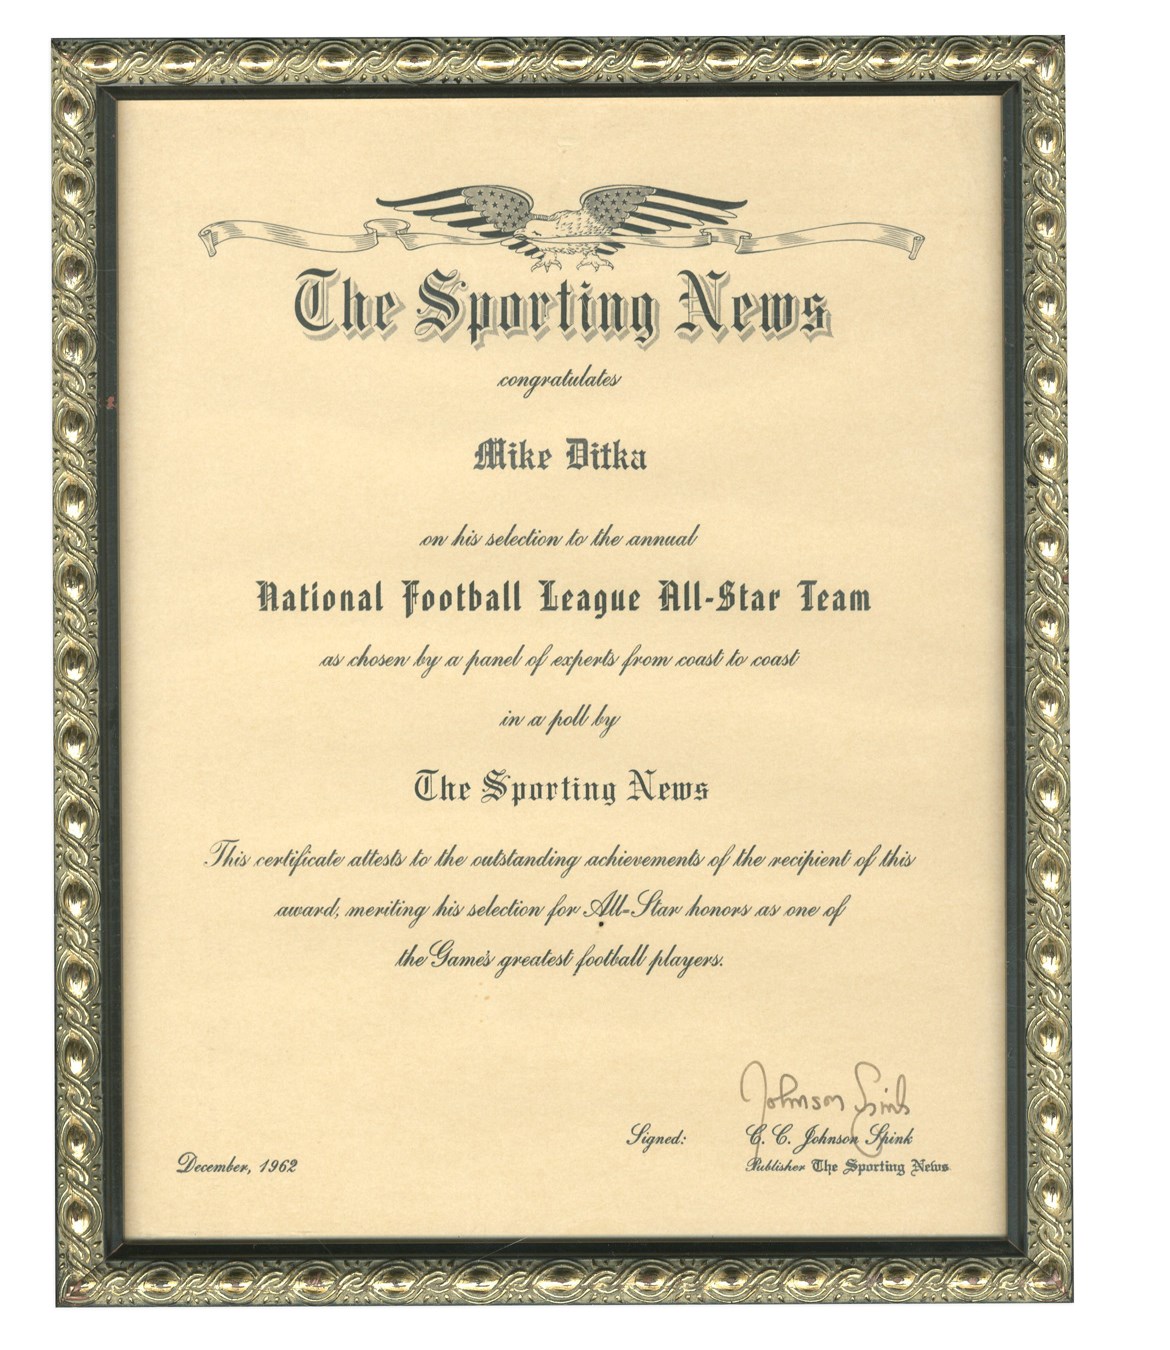 - Mike Ditka 1960s Sporting News NFL All-Star Award (ex-Mike Ditka)